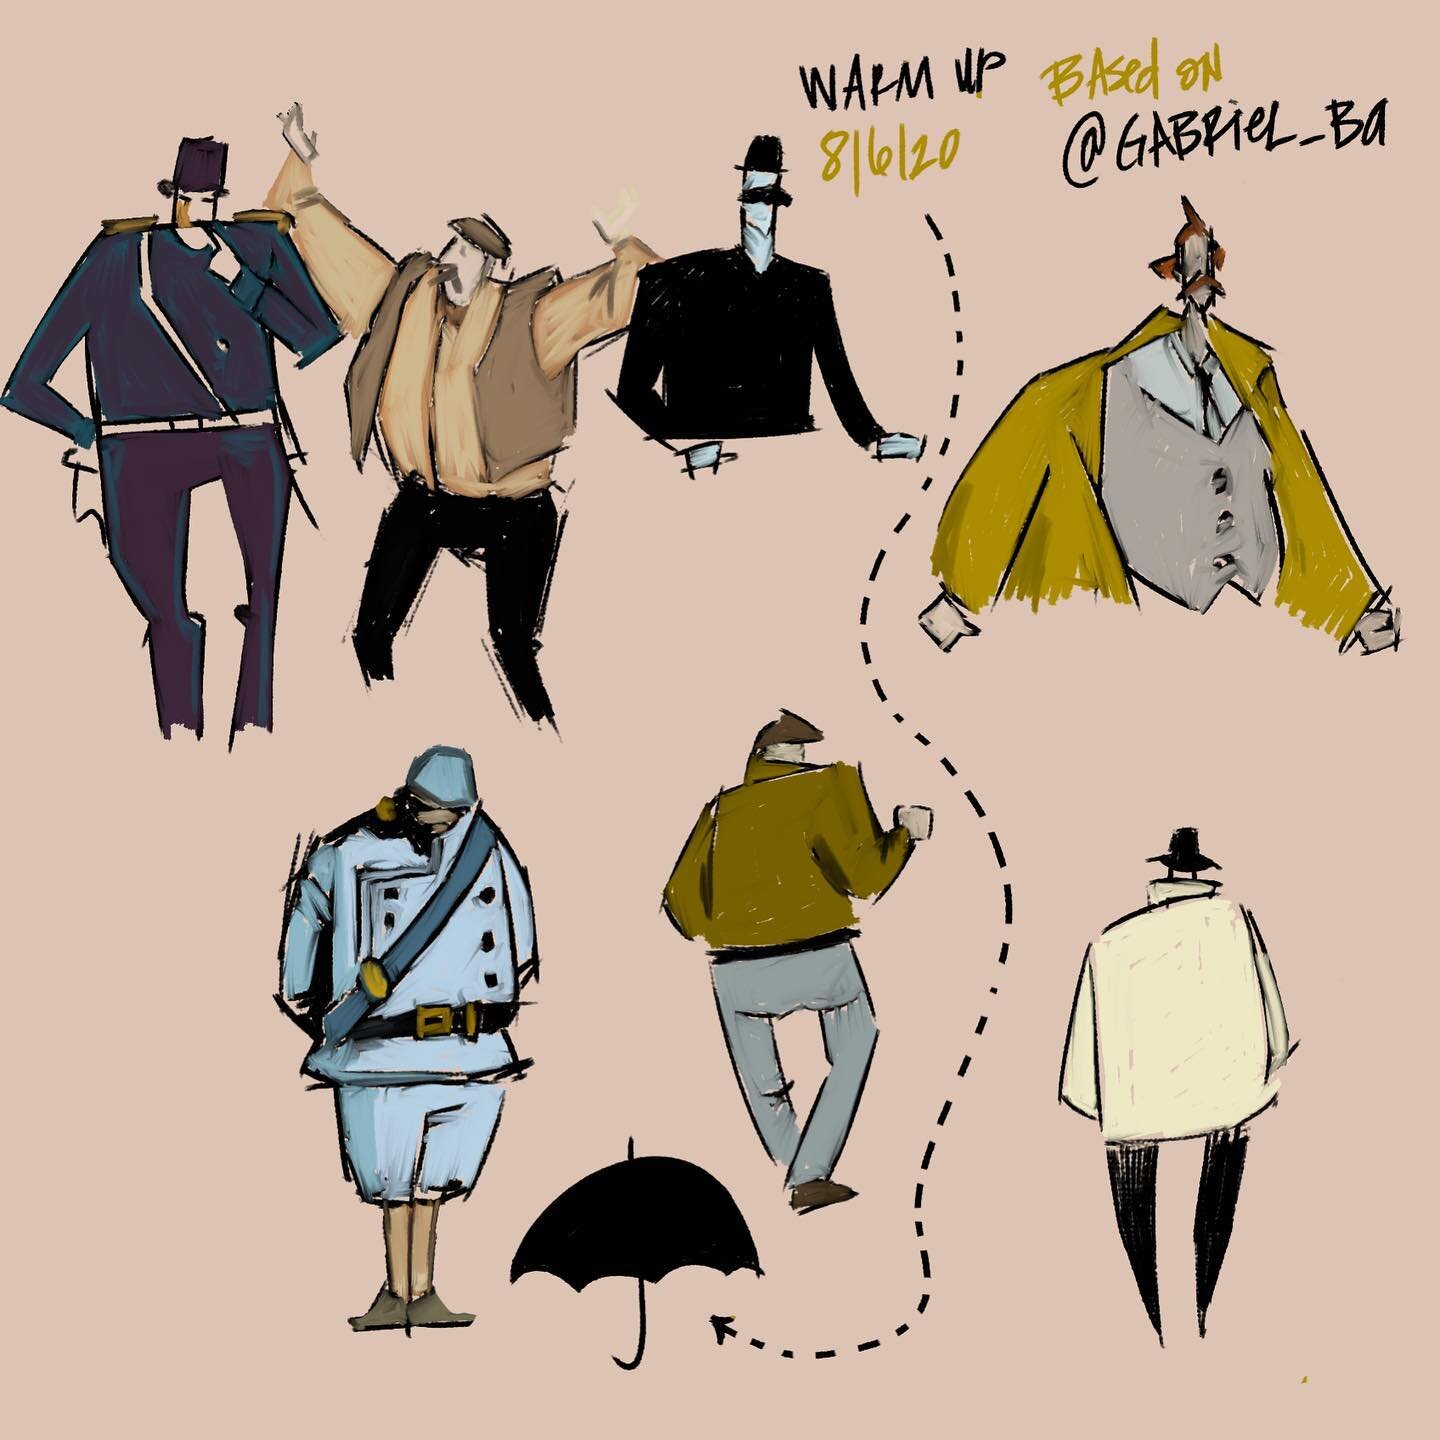 We&rsquo;ve been watching the #umbrellaacademy, so I thought I&rsquo;d revisit the comic for yesterday&rsquo;s warmup. These sketches are based on @gabriel_ba&rsquo;s awesome figures and their exaggerated proportions, which make me wanna 💃. Mine are